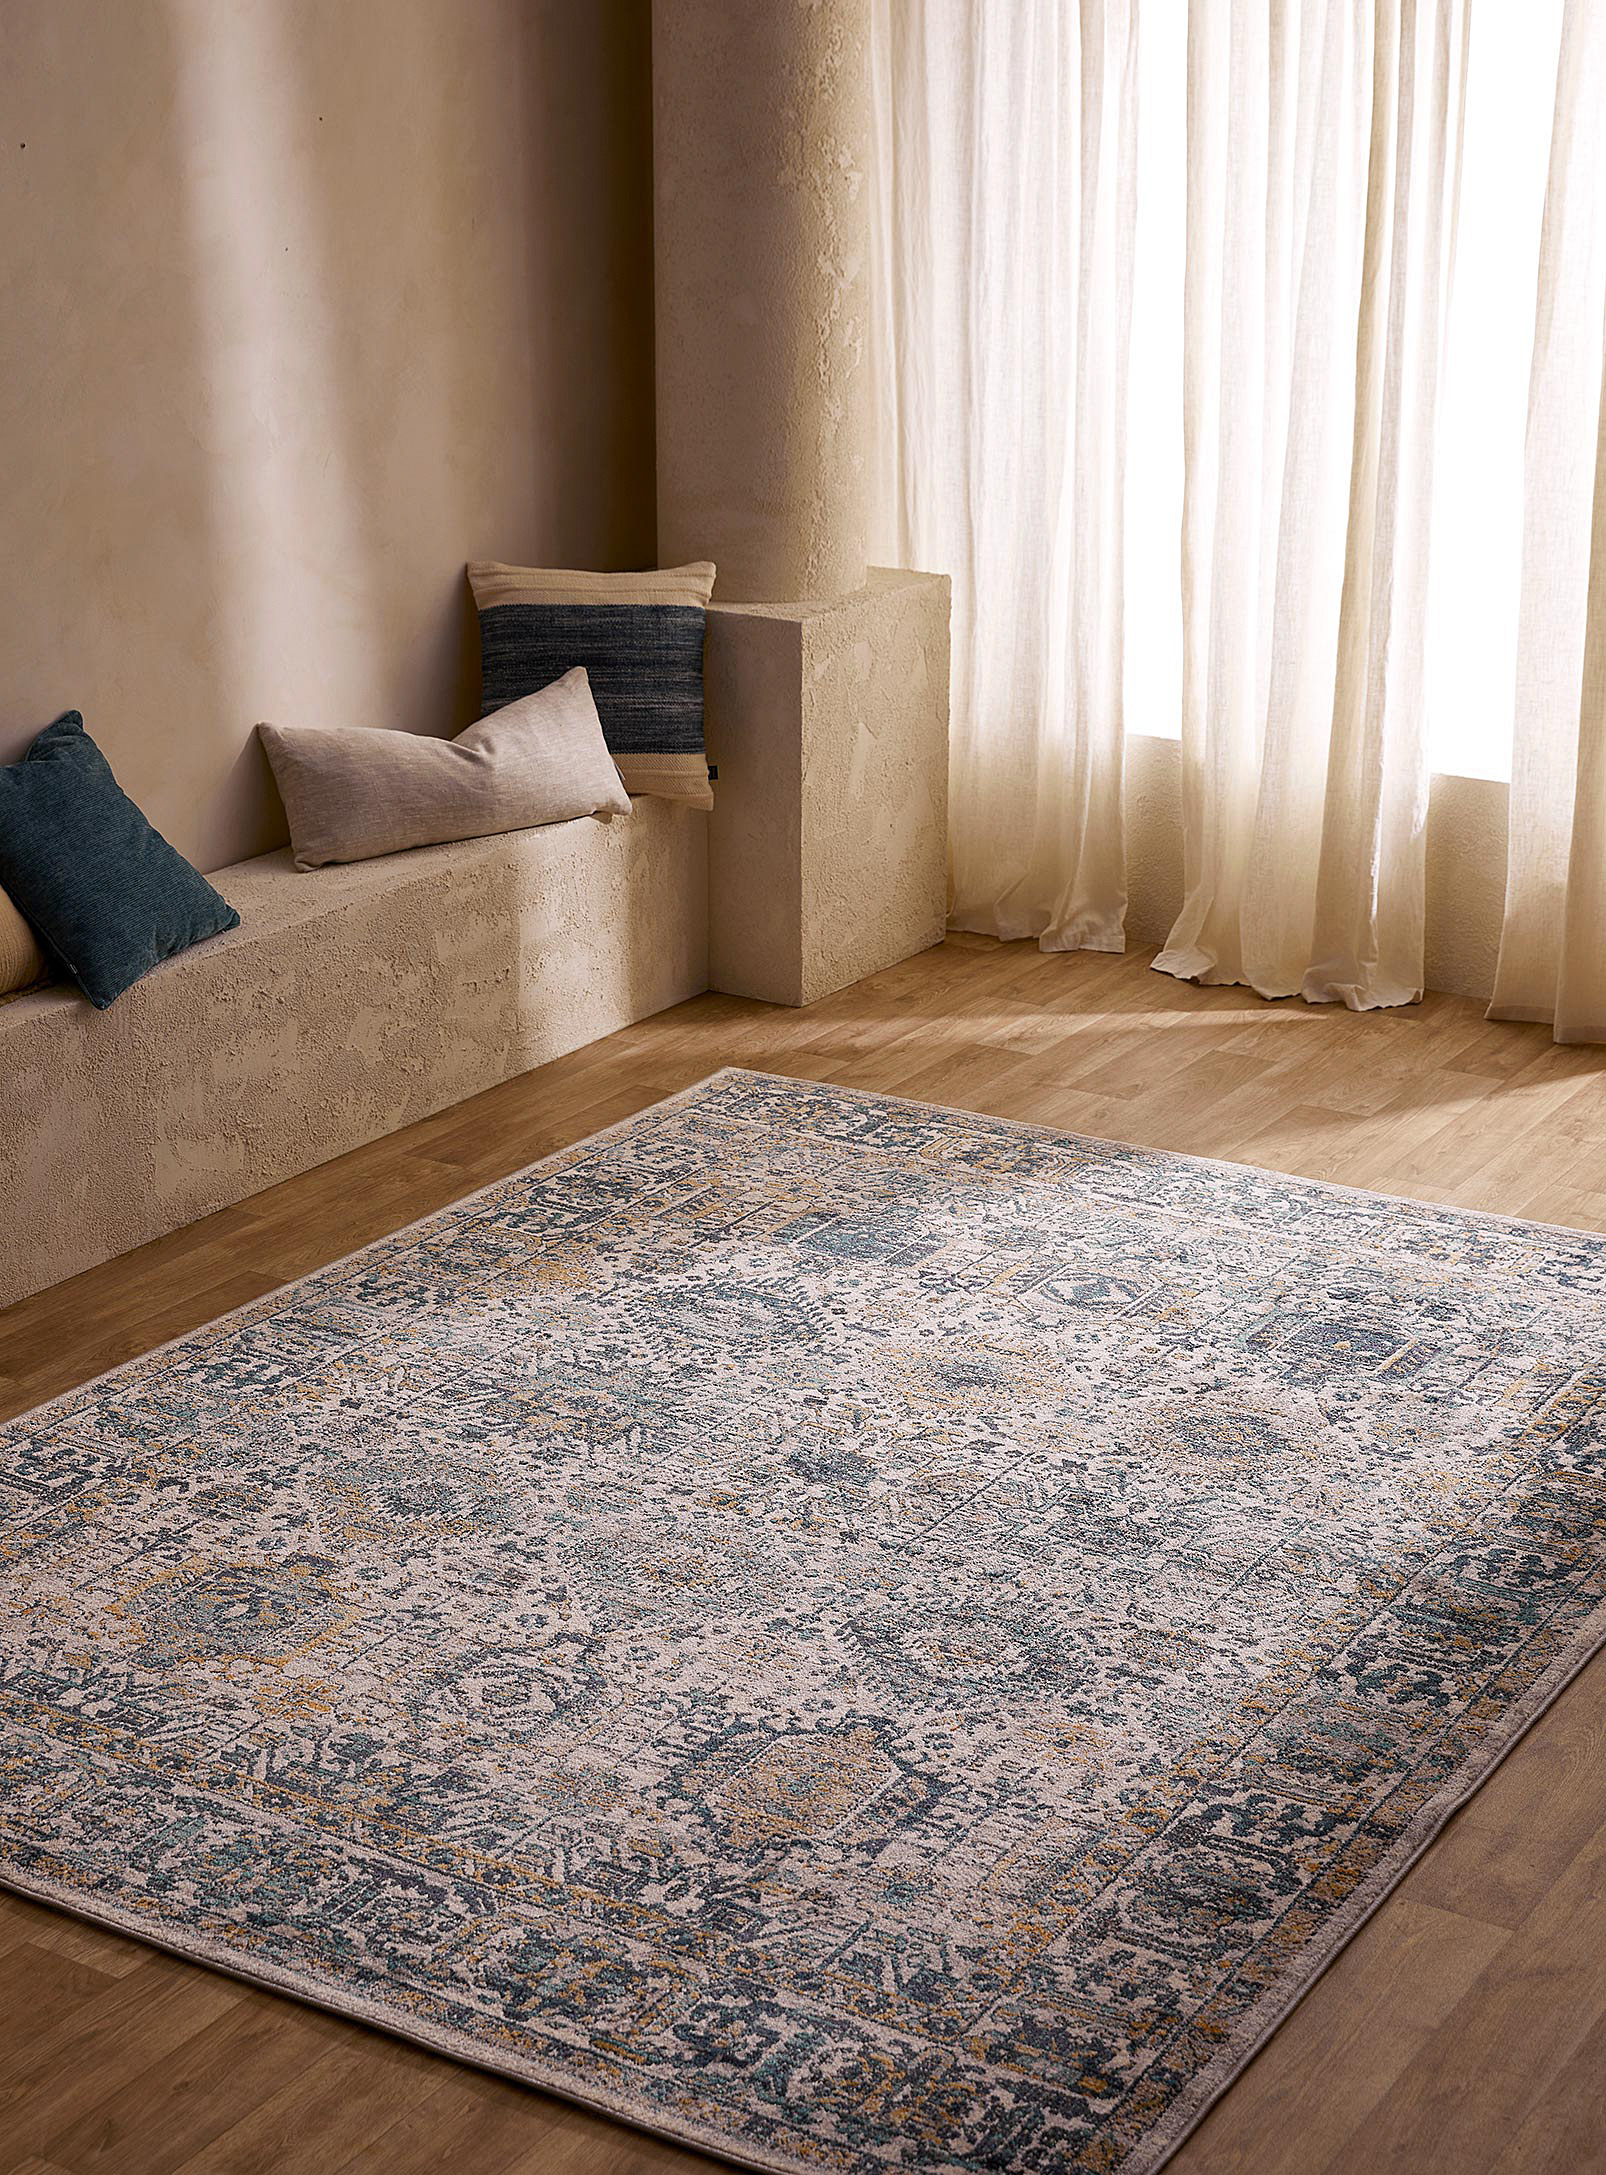 Simons Maison Lost City Rug See Available Sizes In Patterned Blue